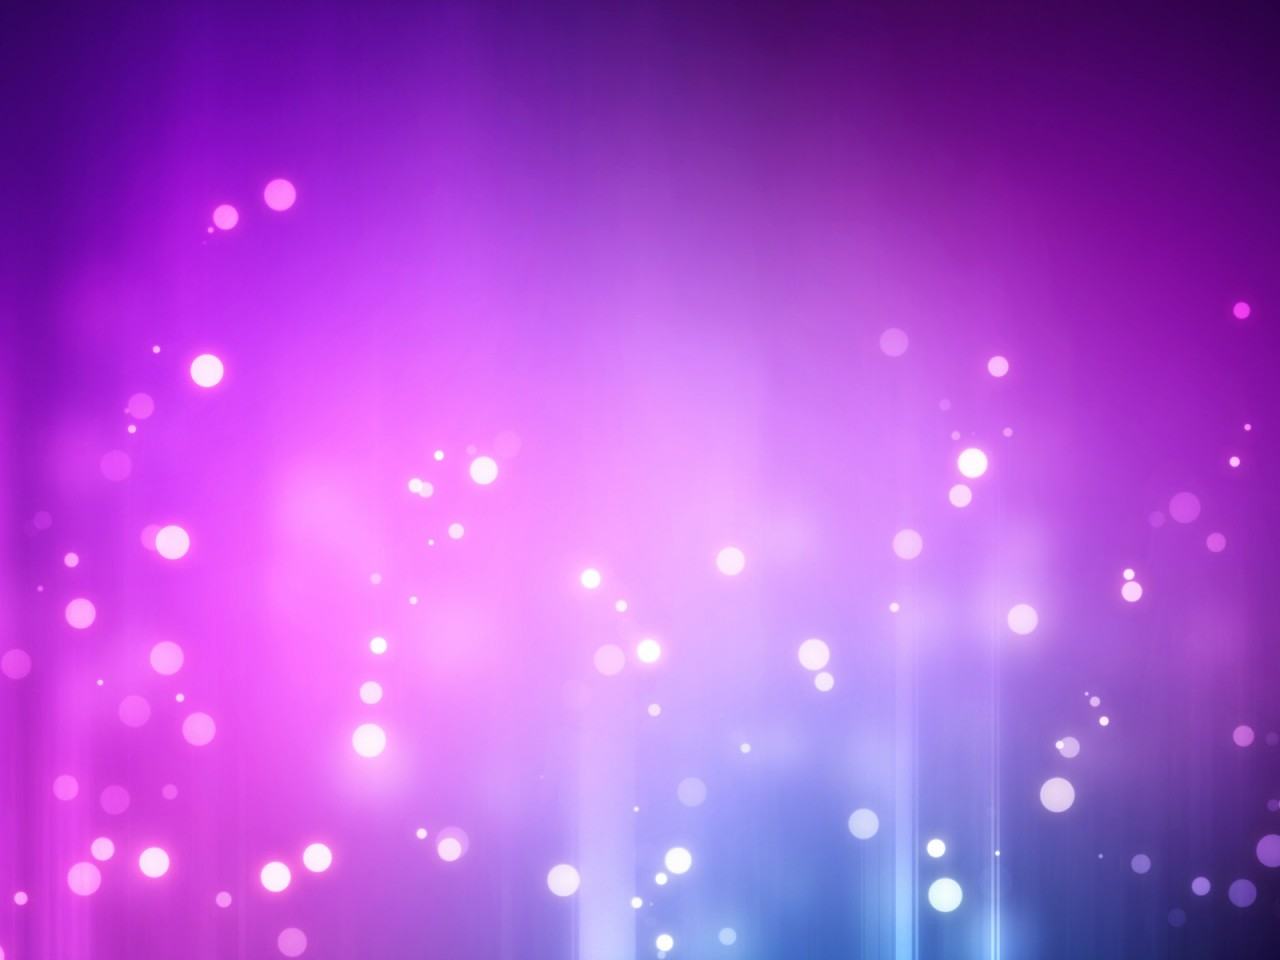 Wallpapers Waves Purple Stars Abstract 1280x960 #waves